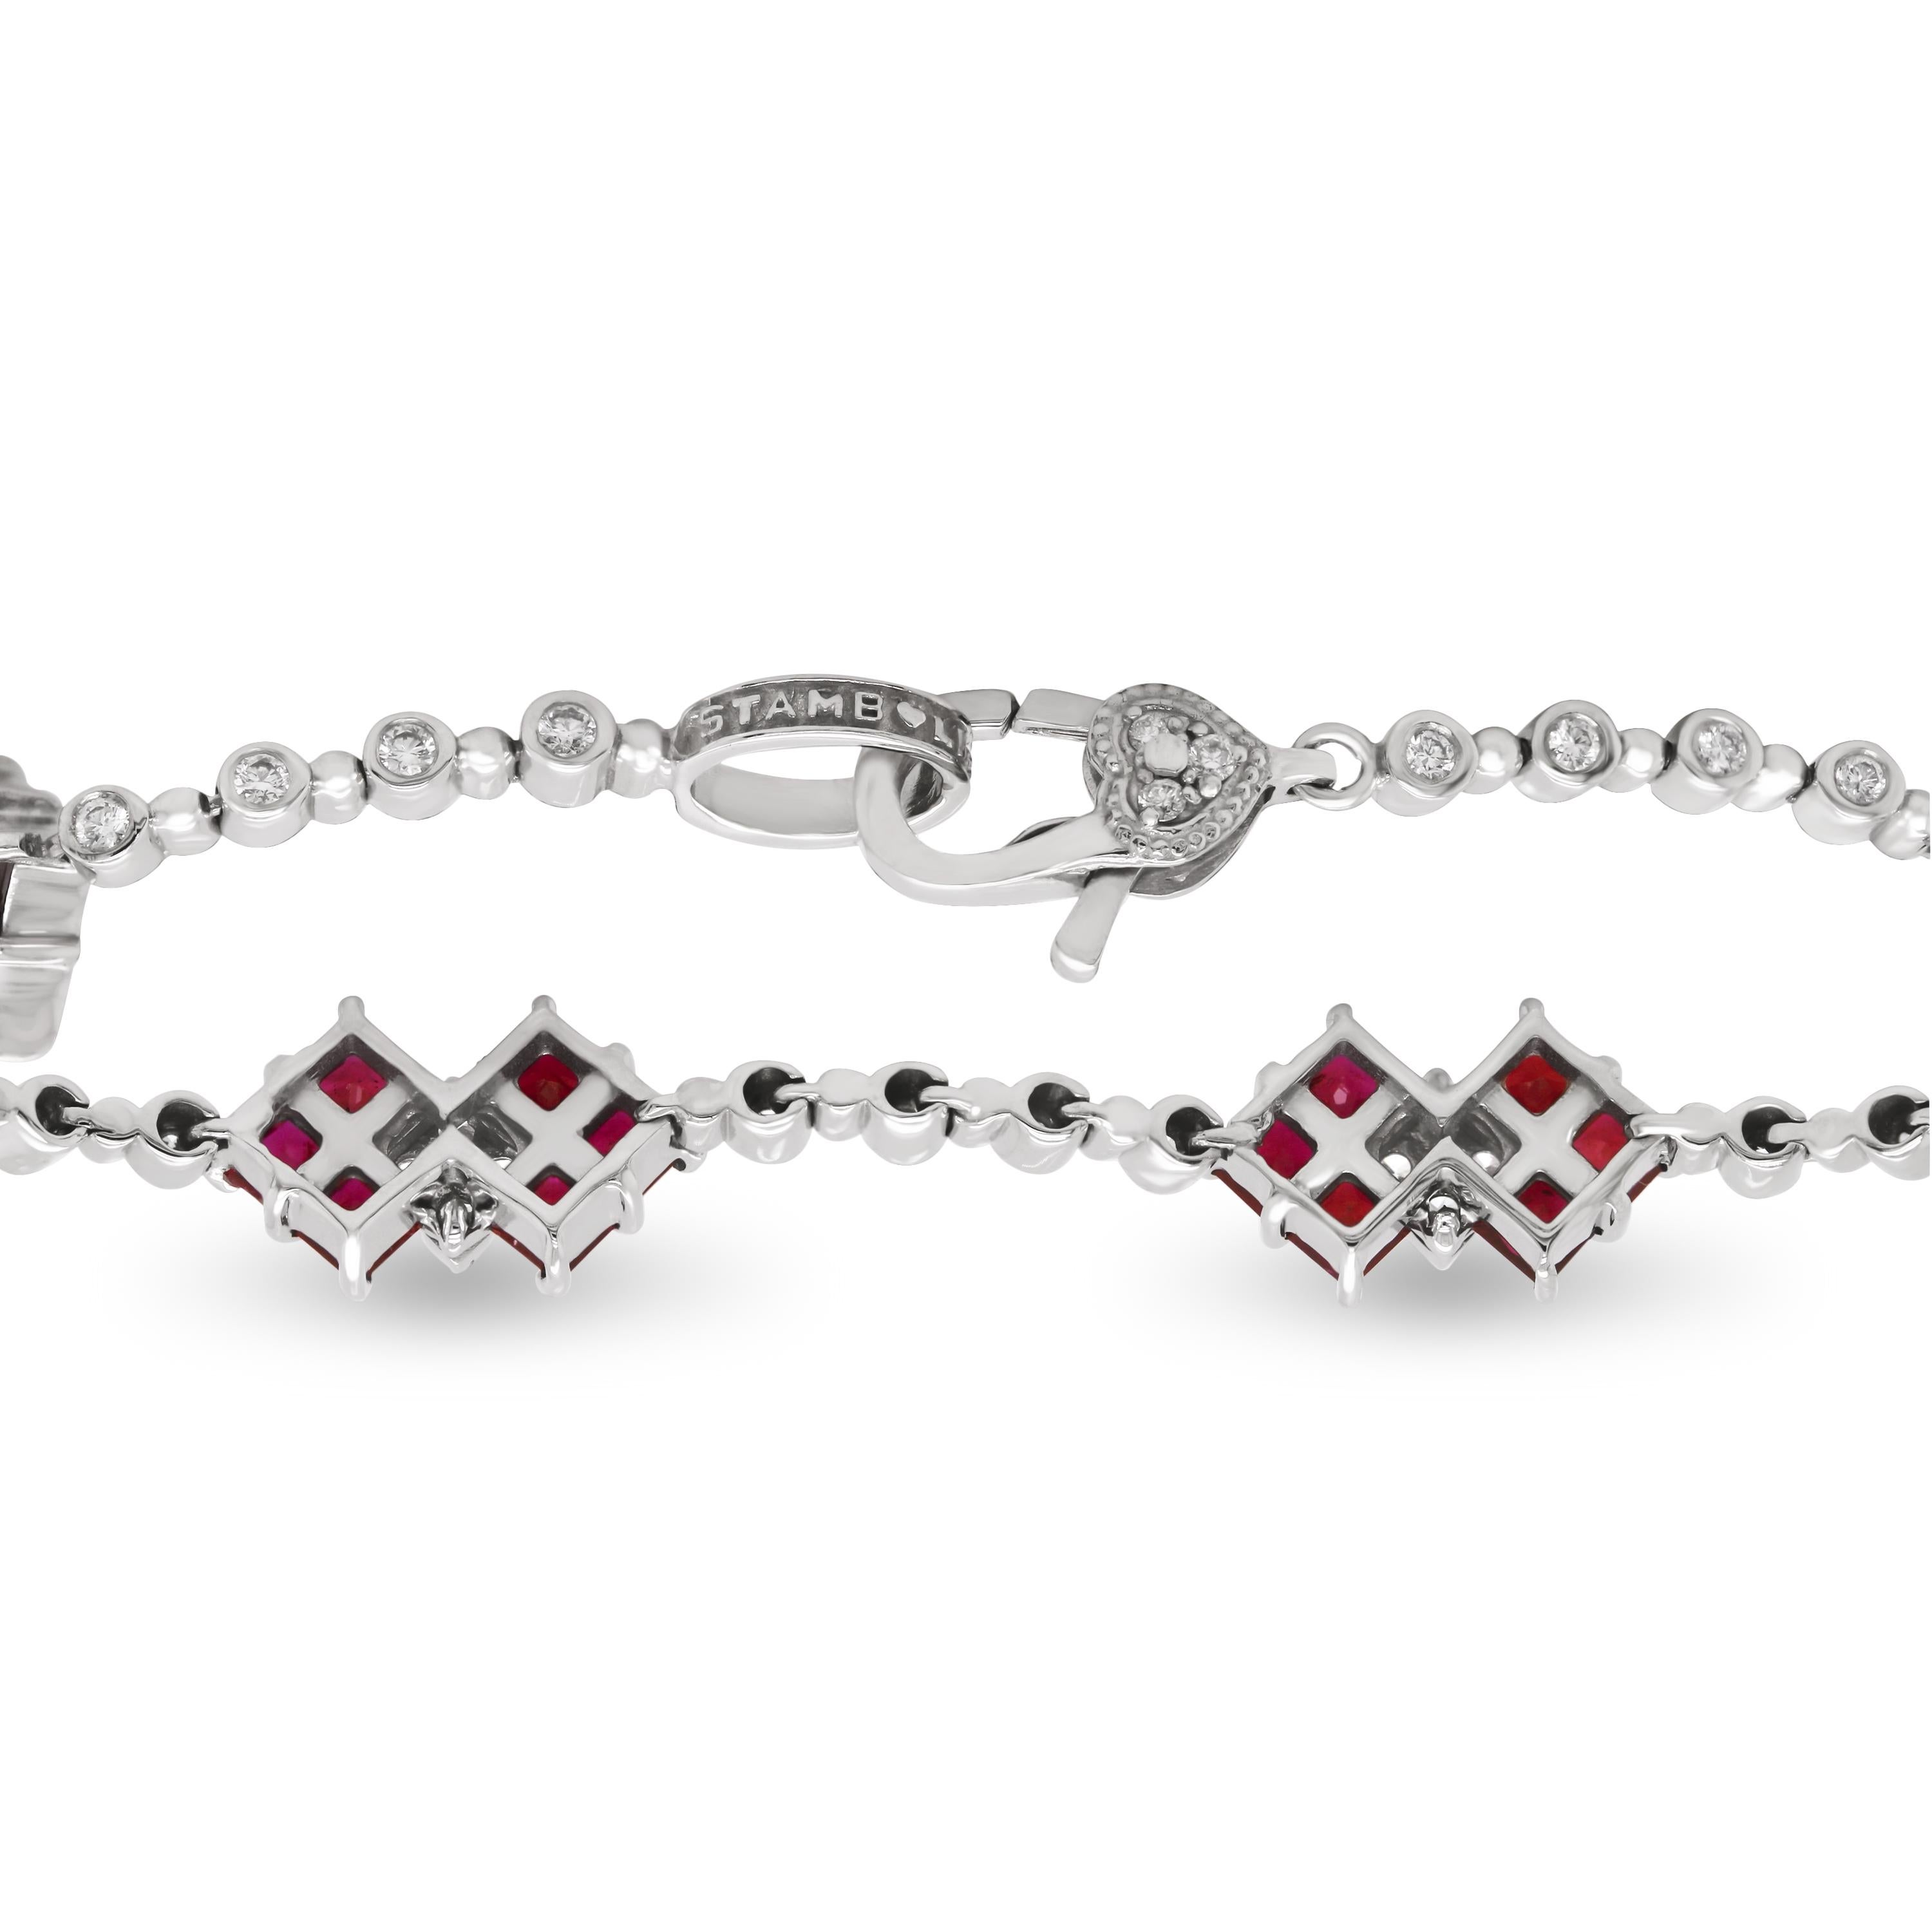 Stambolian 18K White Gold Diamond Princess Cut Ruby Tennis Bracelet

This state of the art bracelet by Stambolian is created in solid 18k white gold with diamonds and rubies. This bracelet is also available in blue sapphire and tsavorite.

Apprx. 5